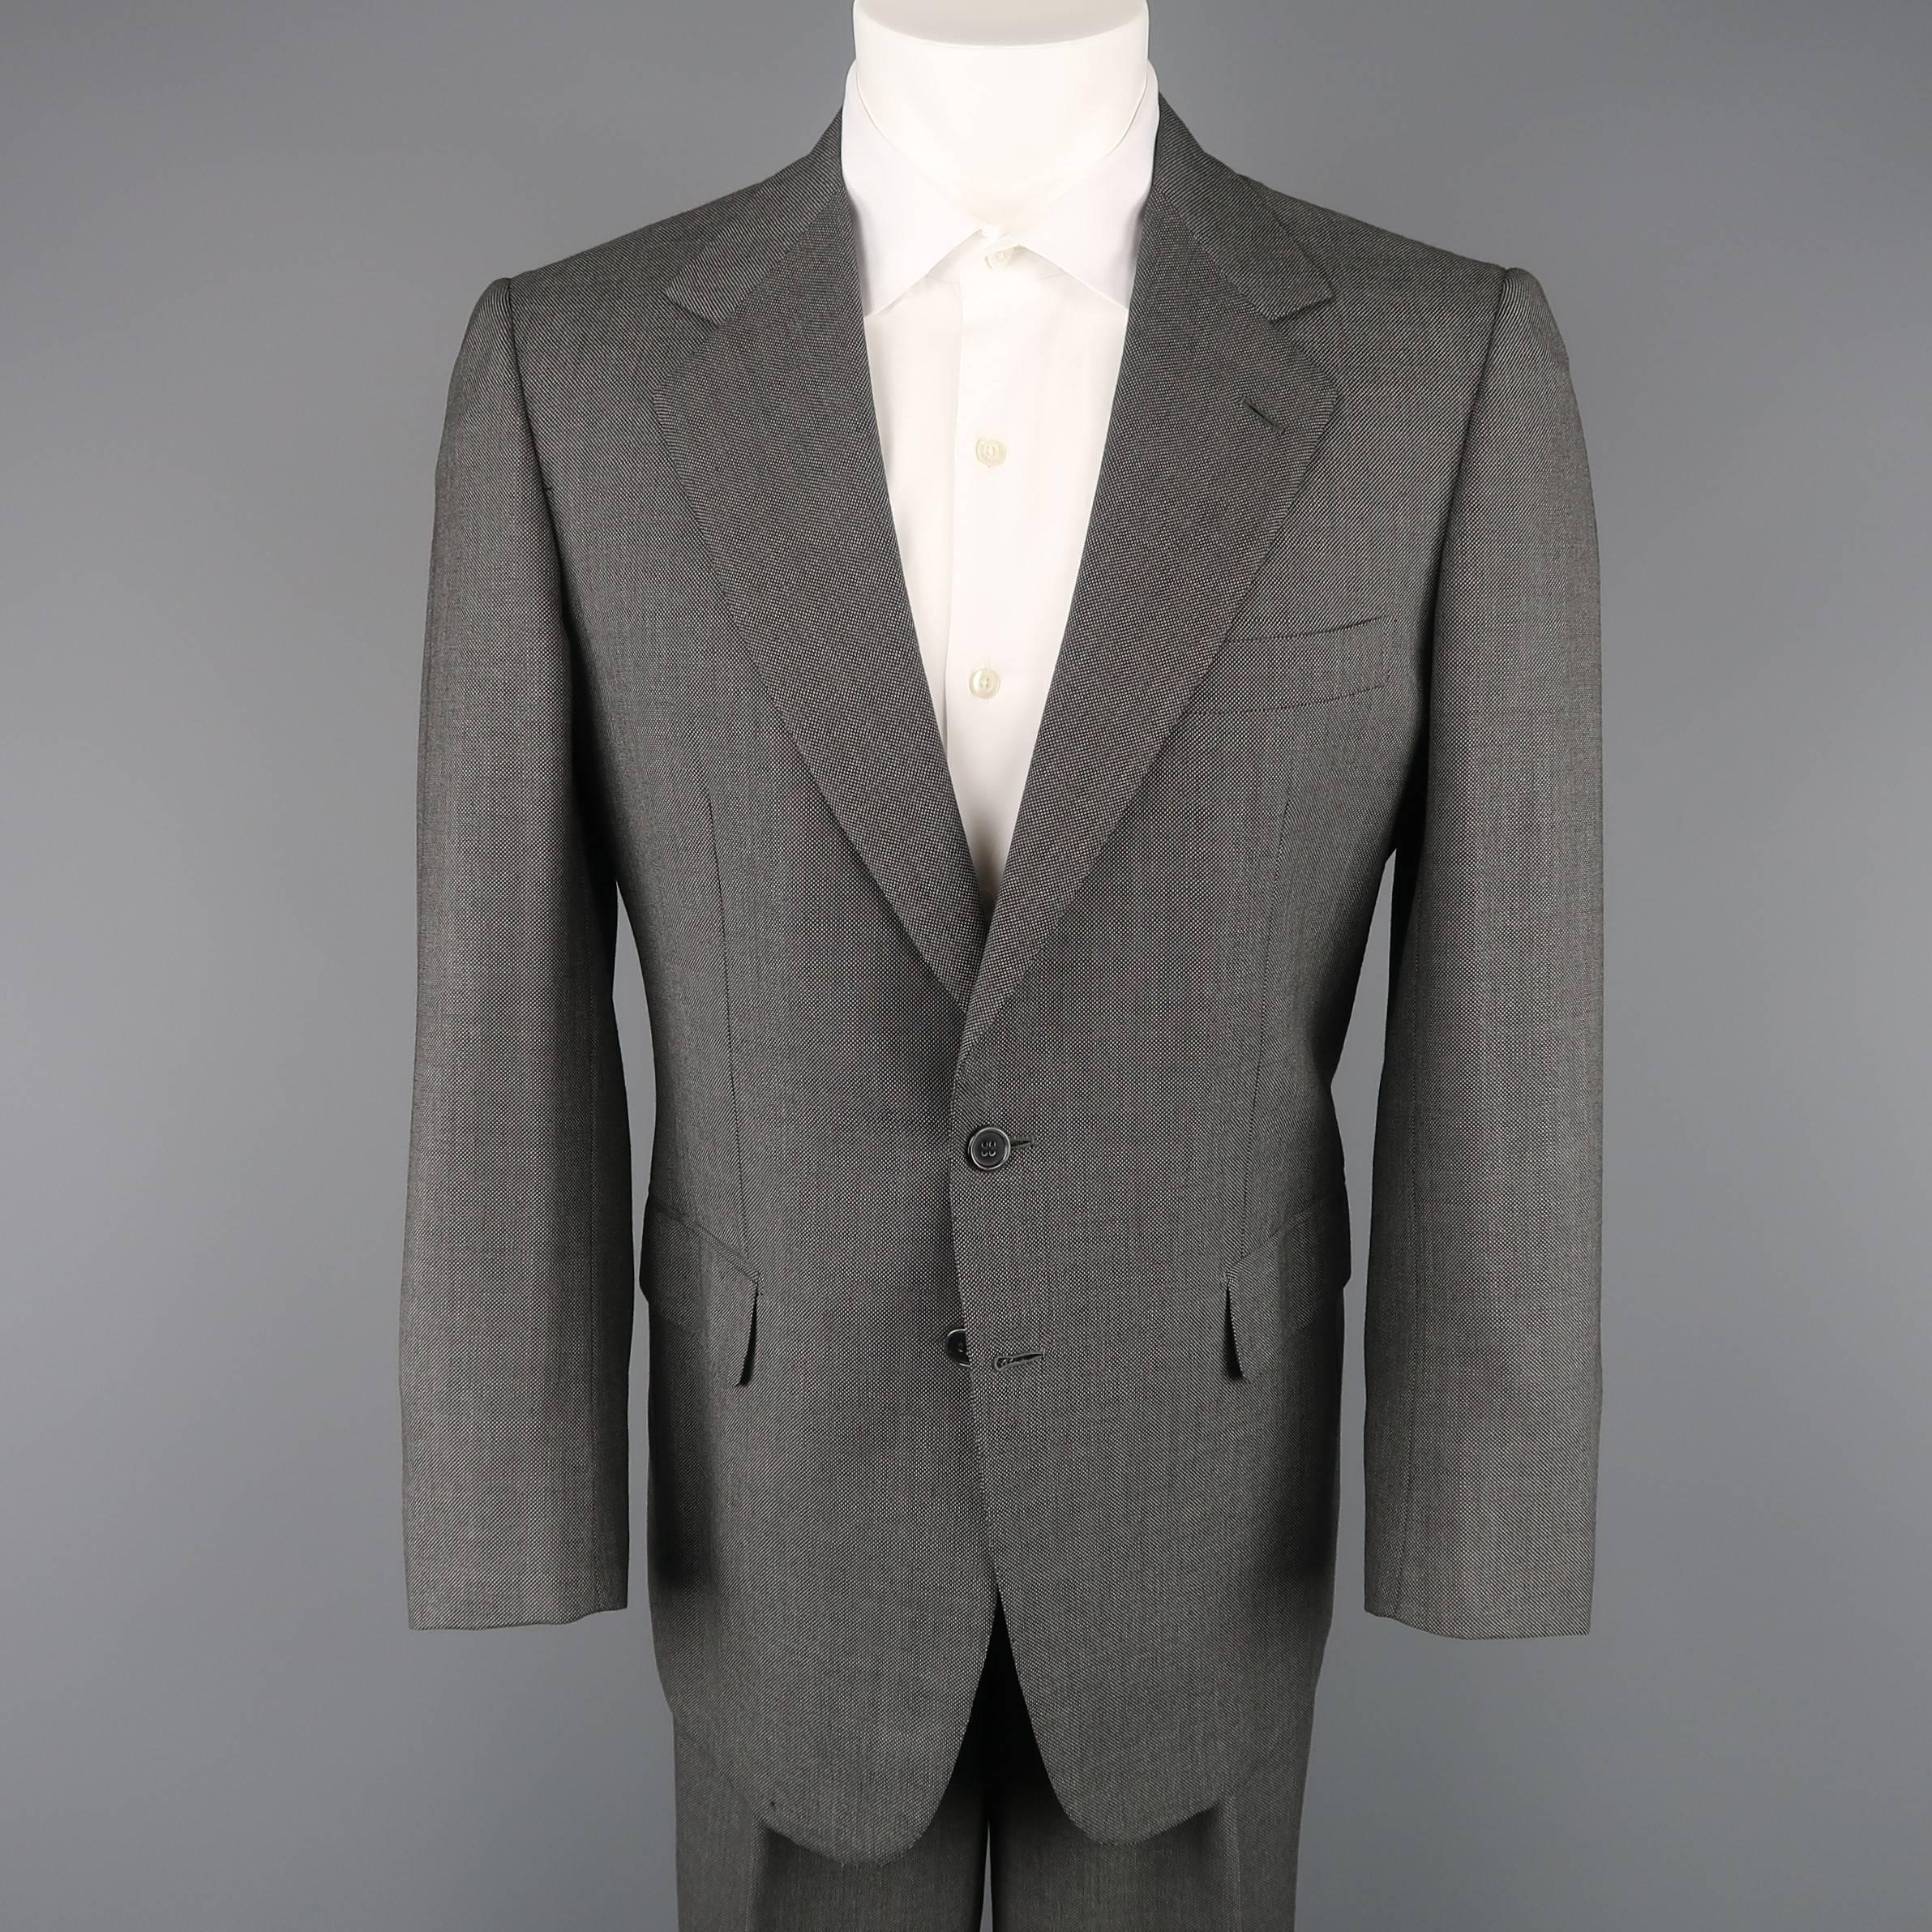 Vintage two piece BRIONI suit comes in charcoal gray nailhead print wool and includes a two button, single breasted sport coat with notch lapel and pleated trousers with cuffed hem. Discoloration on jacket shown in detail shot and internal wear on